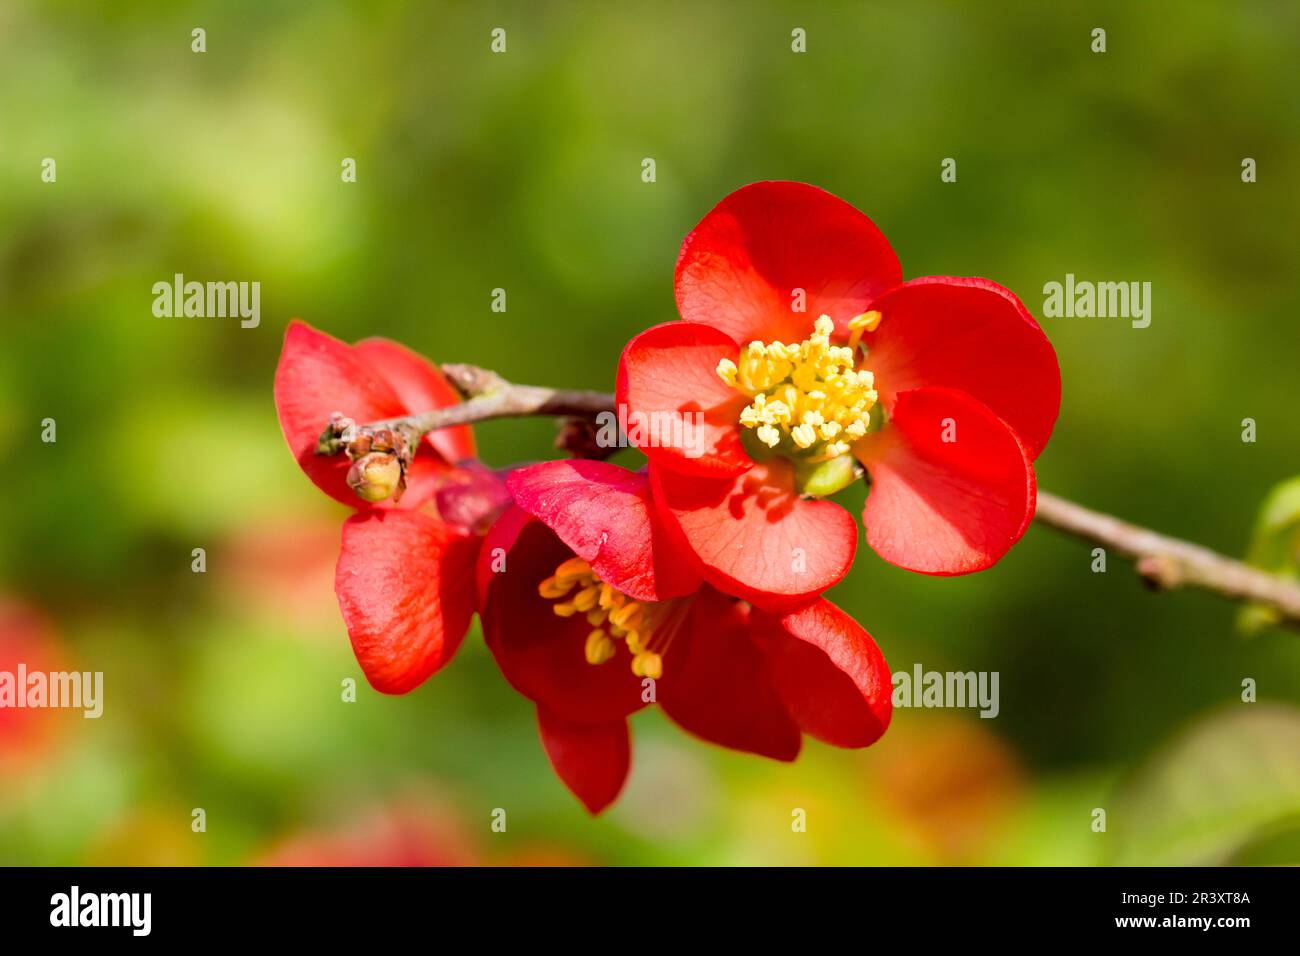 Chaenomeles japonica, known as Japanese quince, Quince, Flowering quince Stock Photo